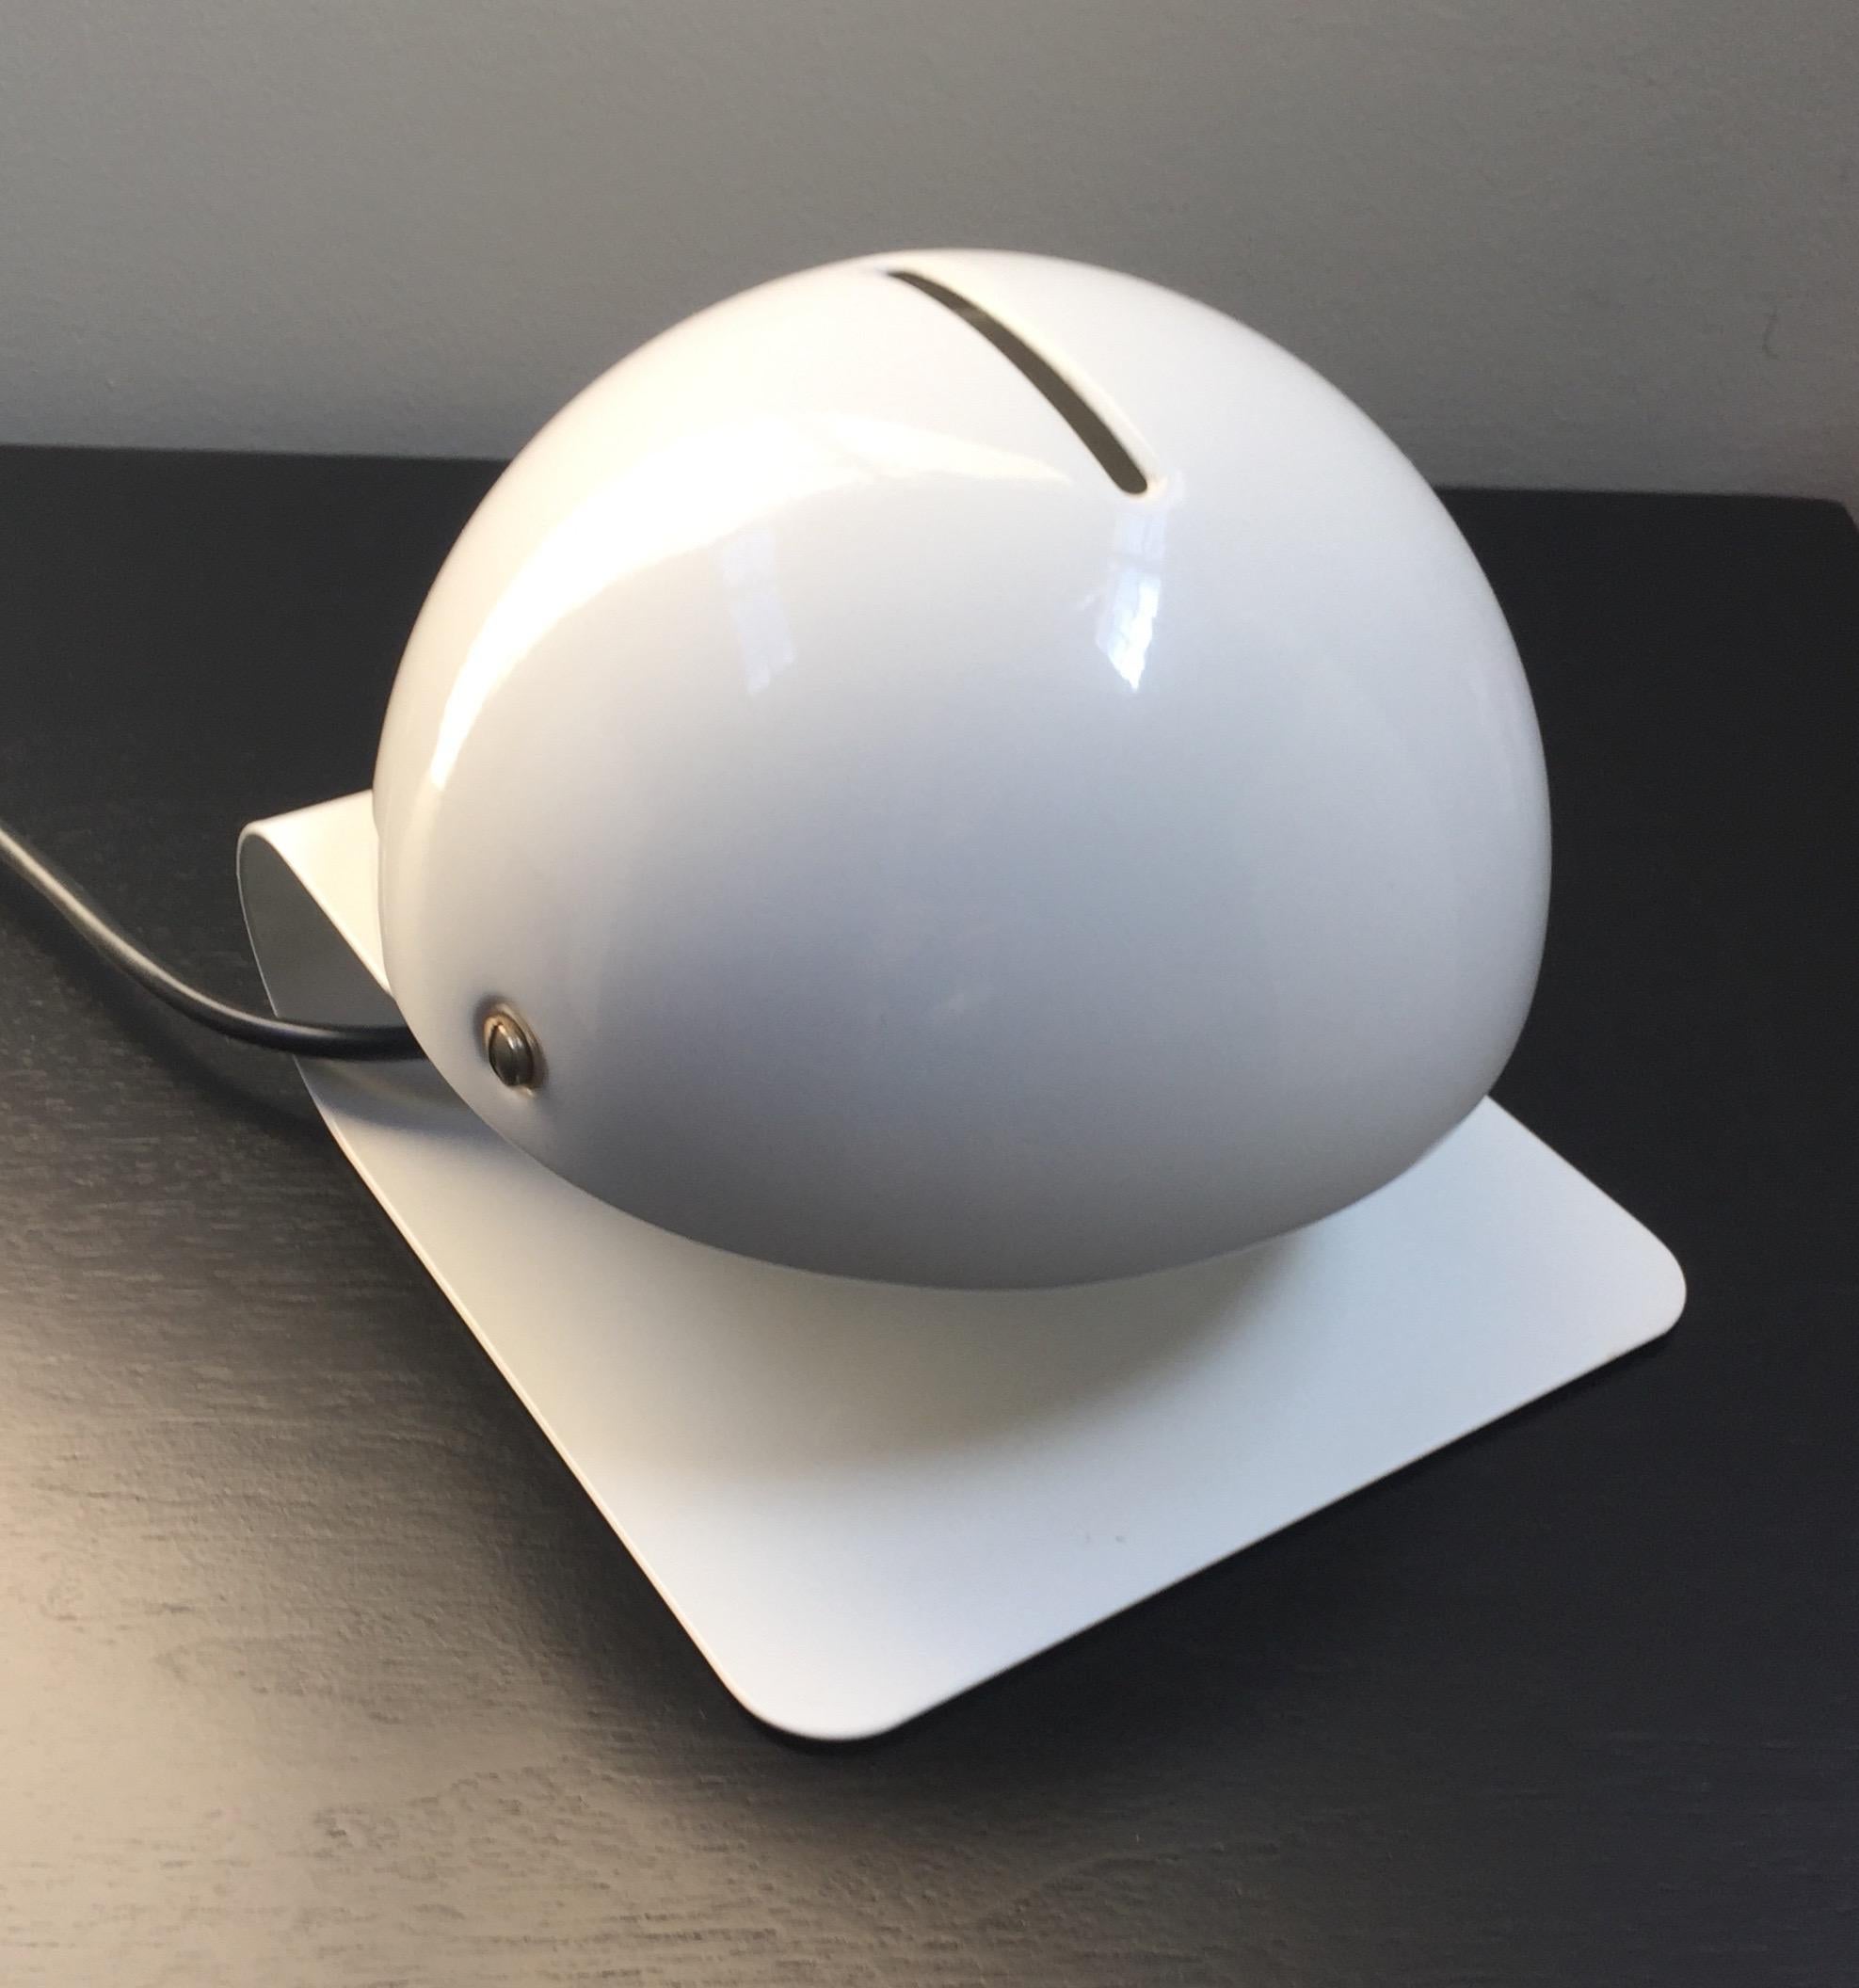 White enamel table lamp with a shade that swivels to adjust the level of light.